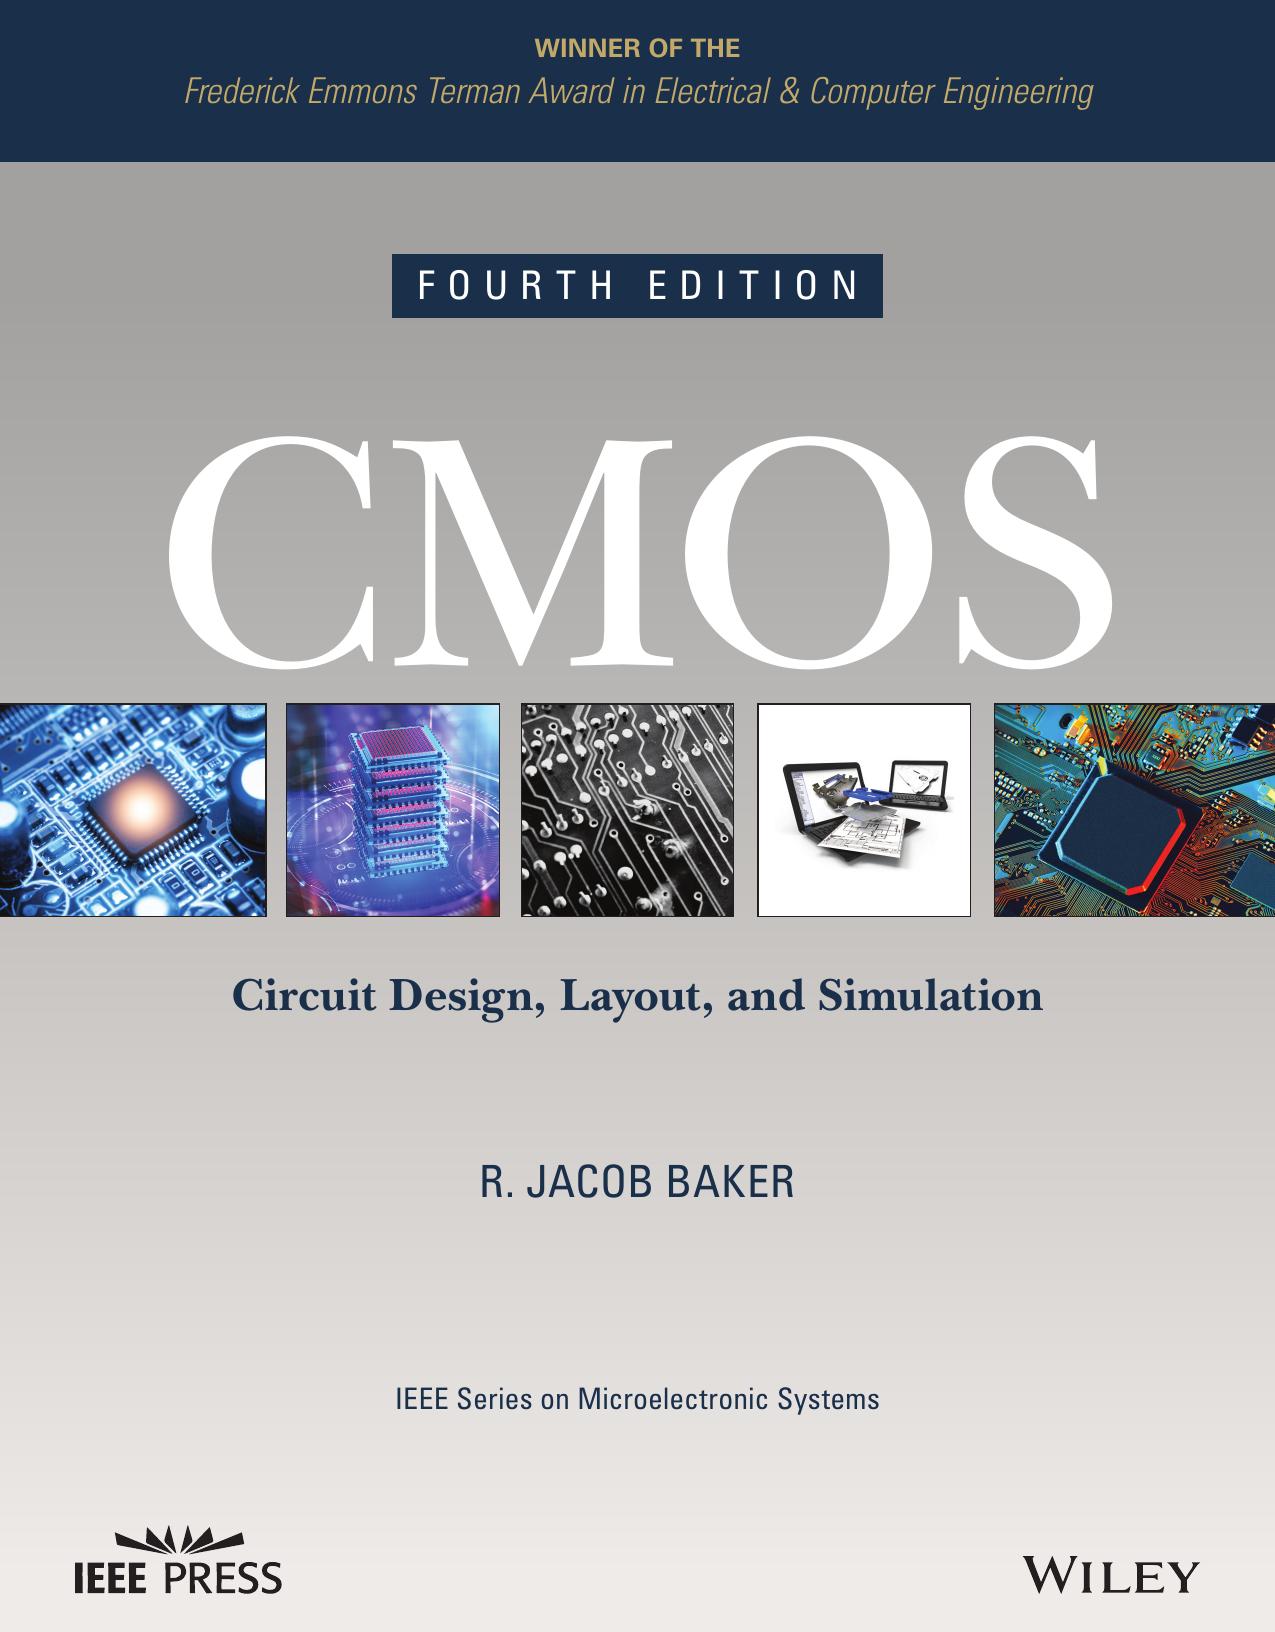 CMOS Circuit Design, Layout, and Simulation - Administrator.jpg